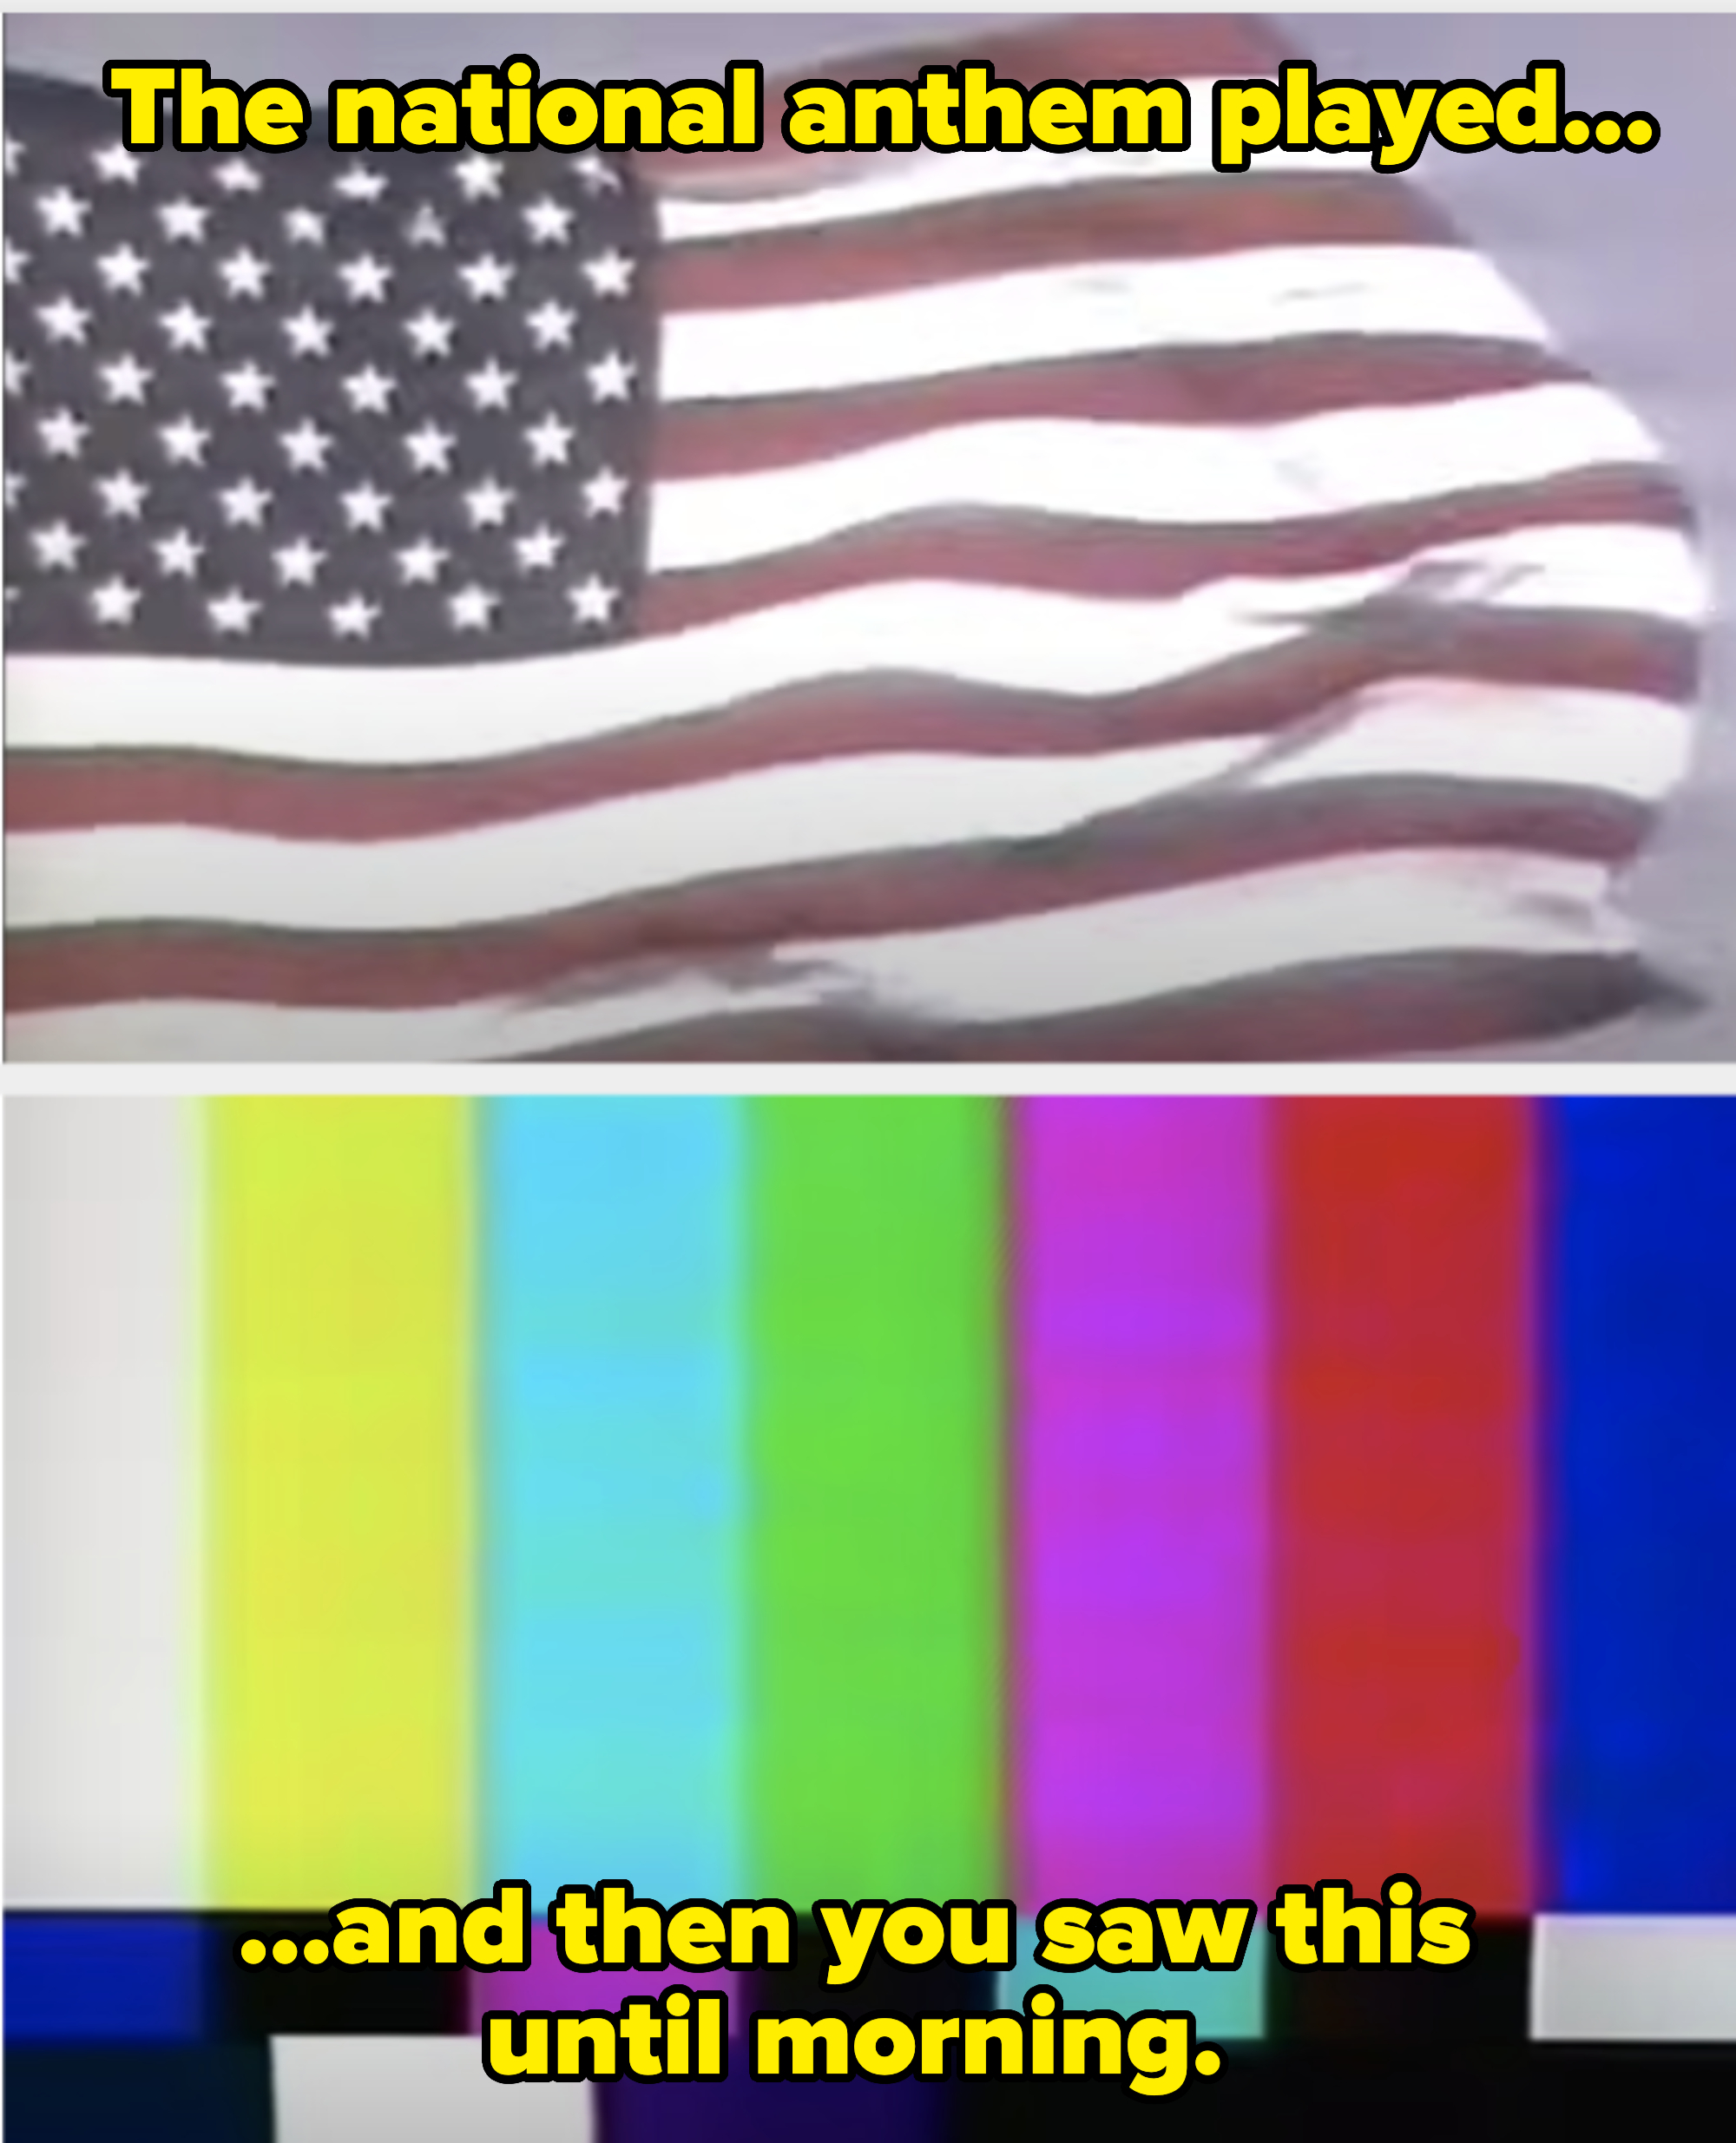 A television screen playing the national anthem and then going blank